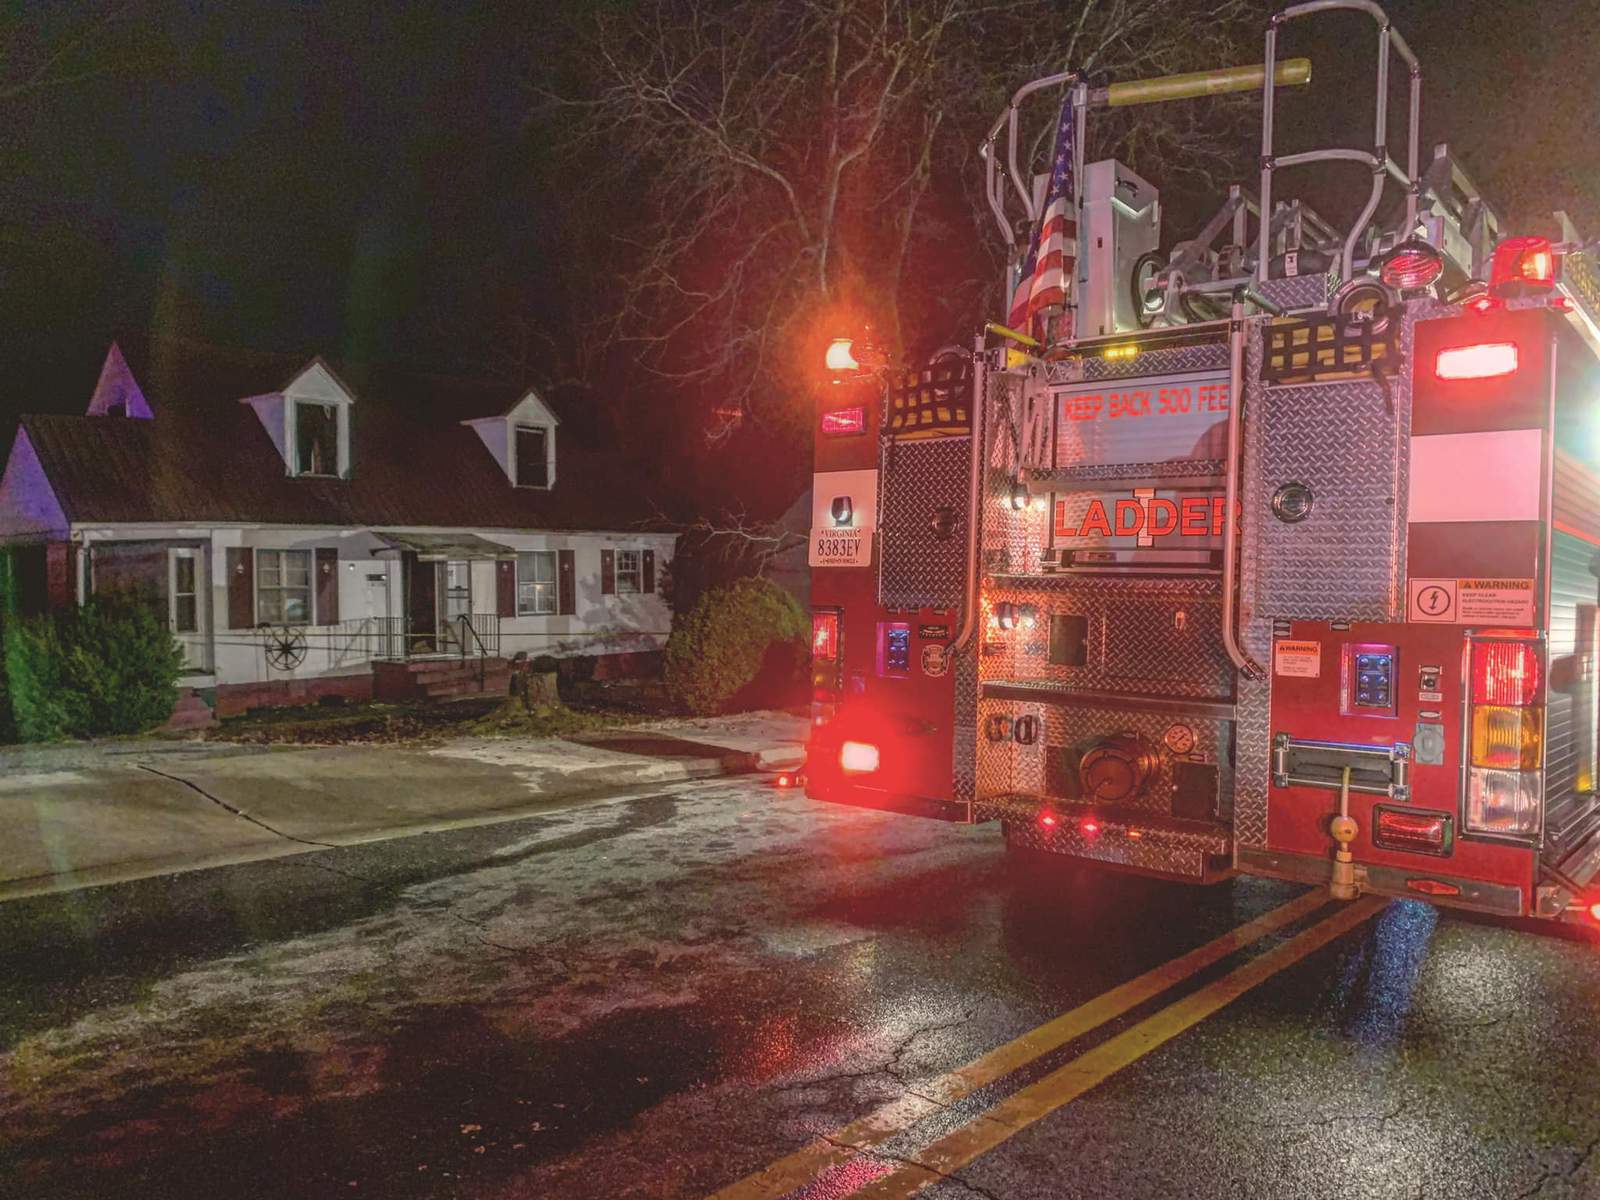 Two hospitalized, one firefighter injured following house fire in Altavista